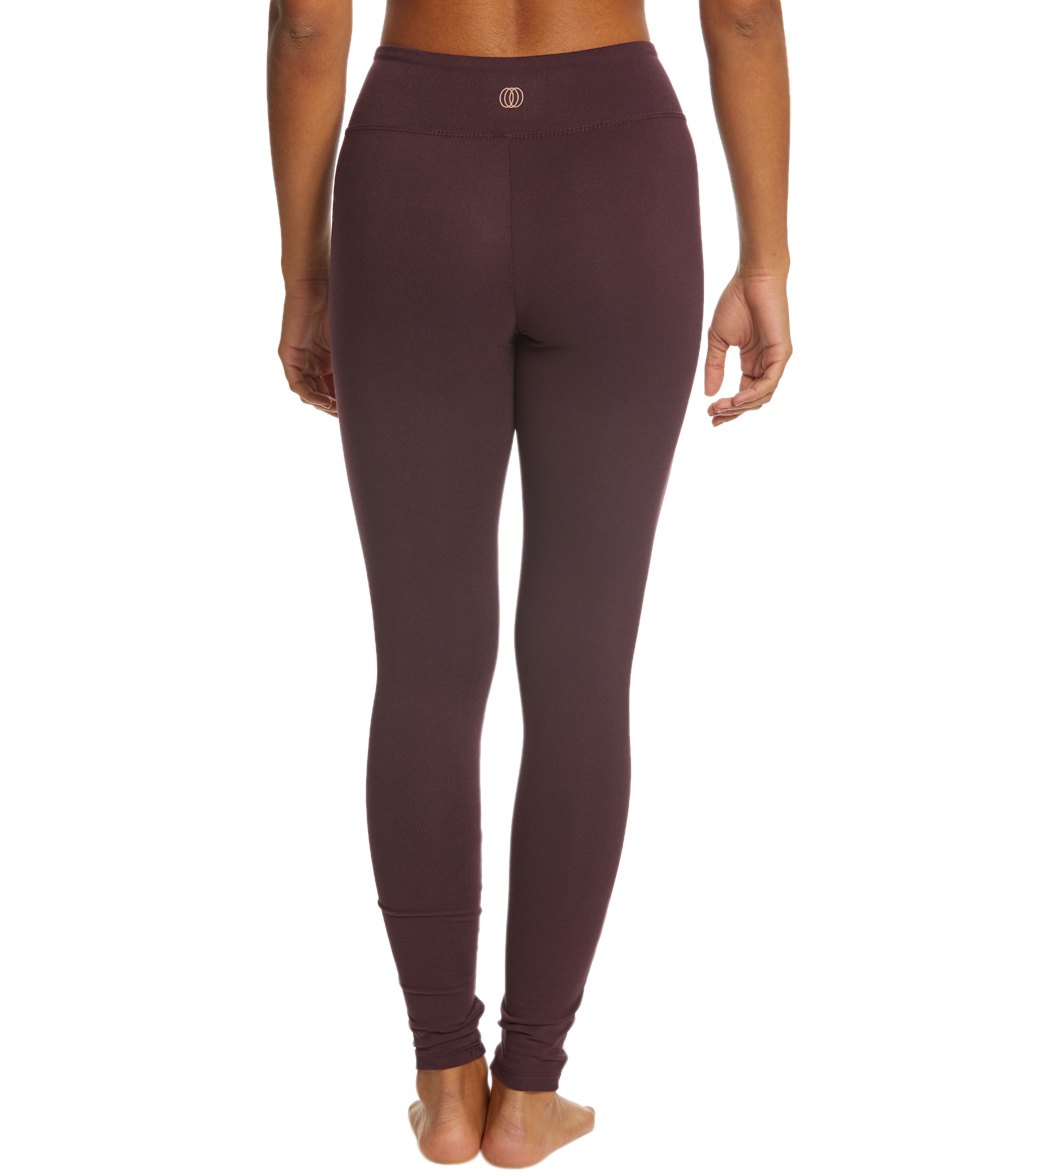 Only 19.19 usd for Balance Collection Malibu Yoga Leggings Wild Plum/Lotus  Pink Online at the Shop